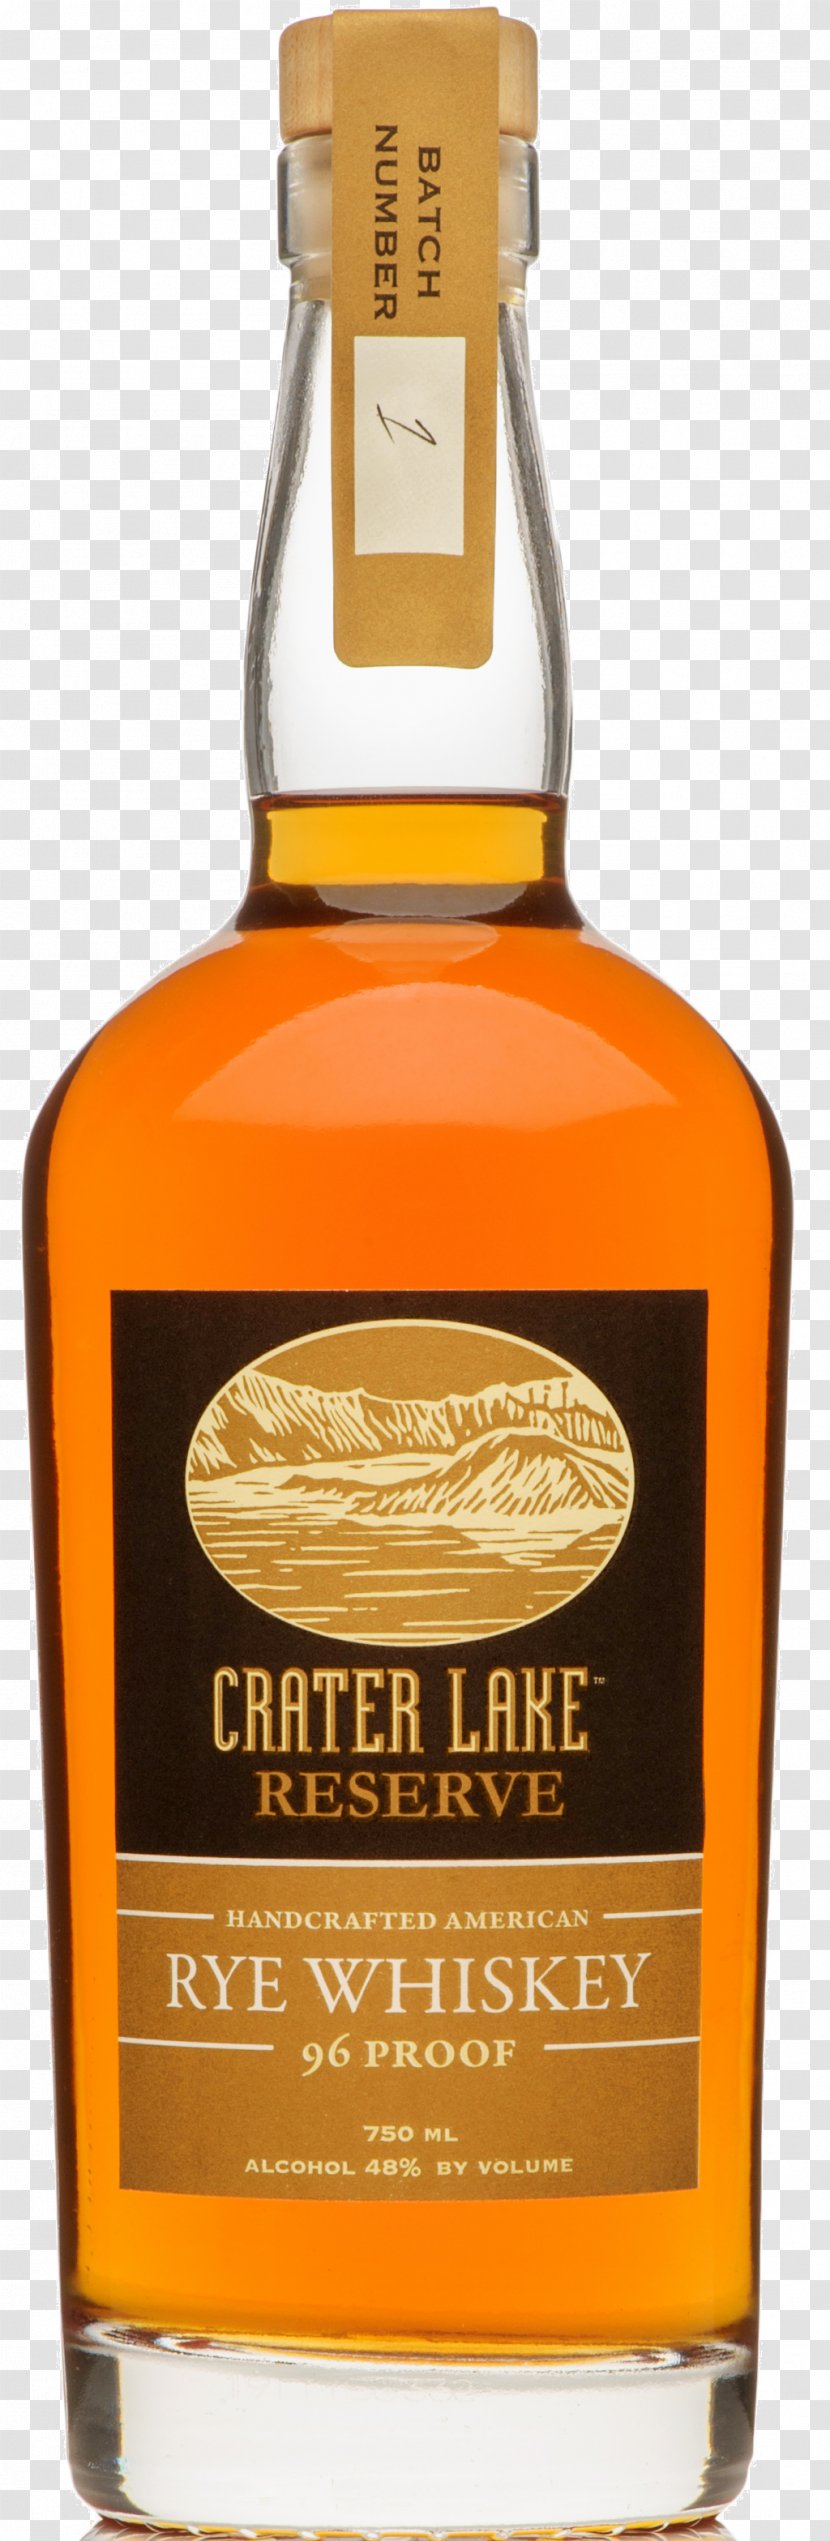 Rye Whiskey Crater Lake Scotch Whisky Distilled Beverage - Wine Transparent PNG